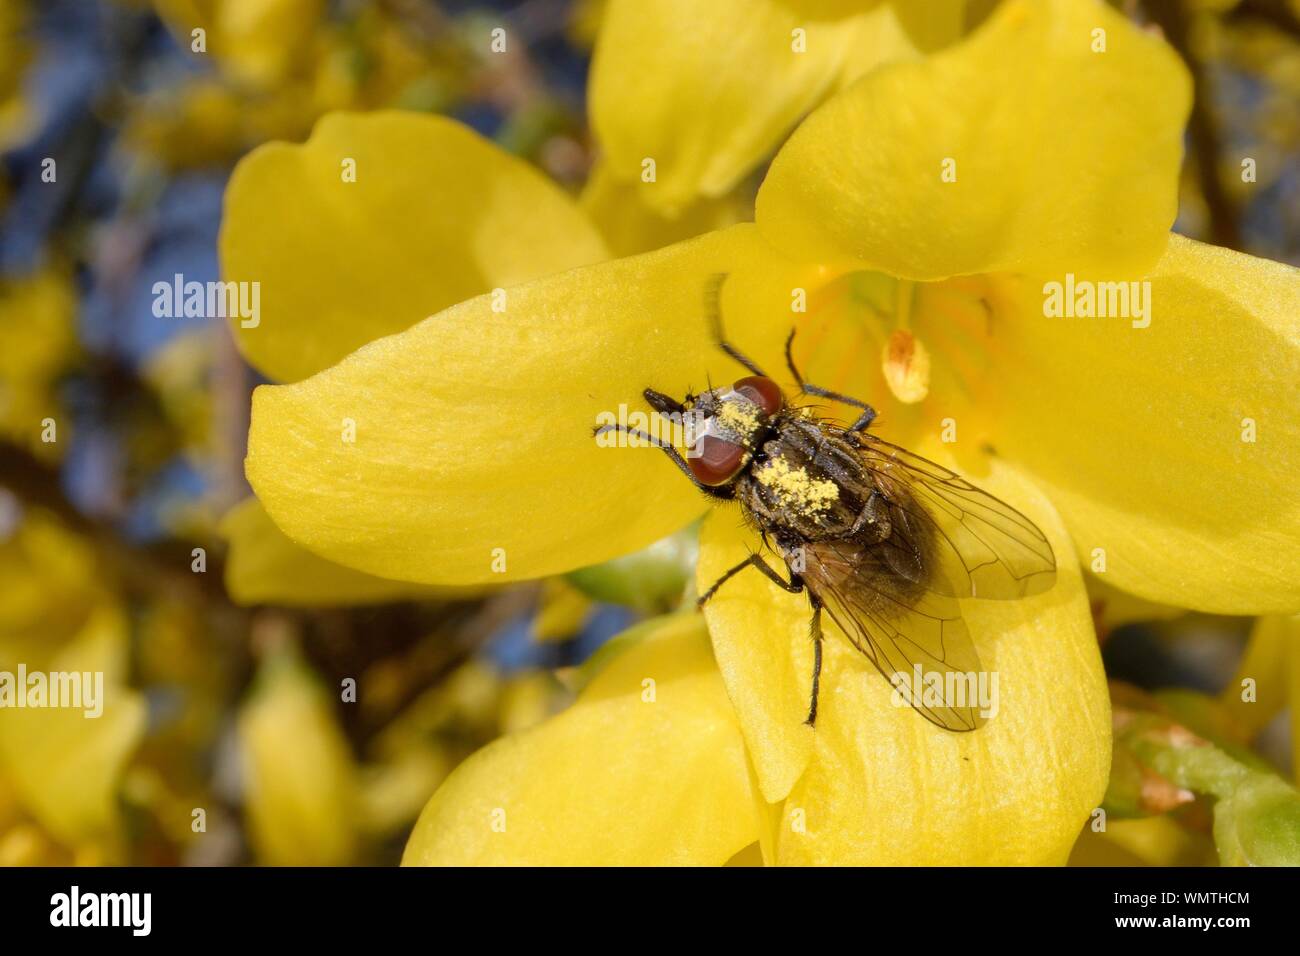 Face fly / Autumn house fly (Musca autumnalis) dusted with pollen feeding on a Forsythia flower, Wiltshire garden, UK, March. Stock Photo